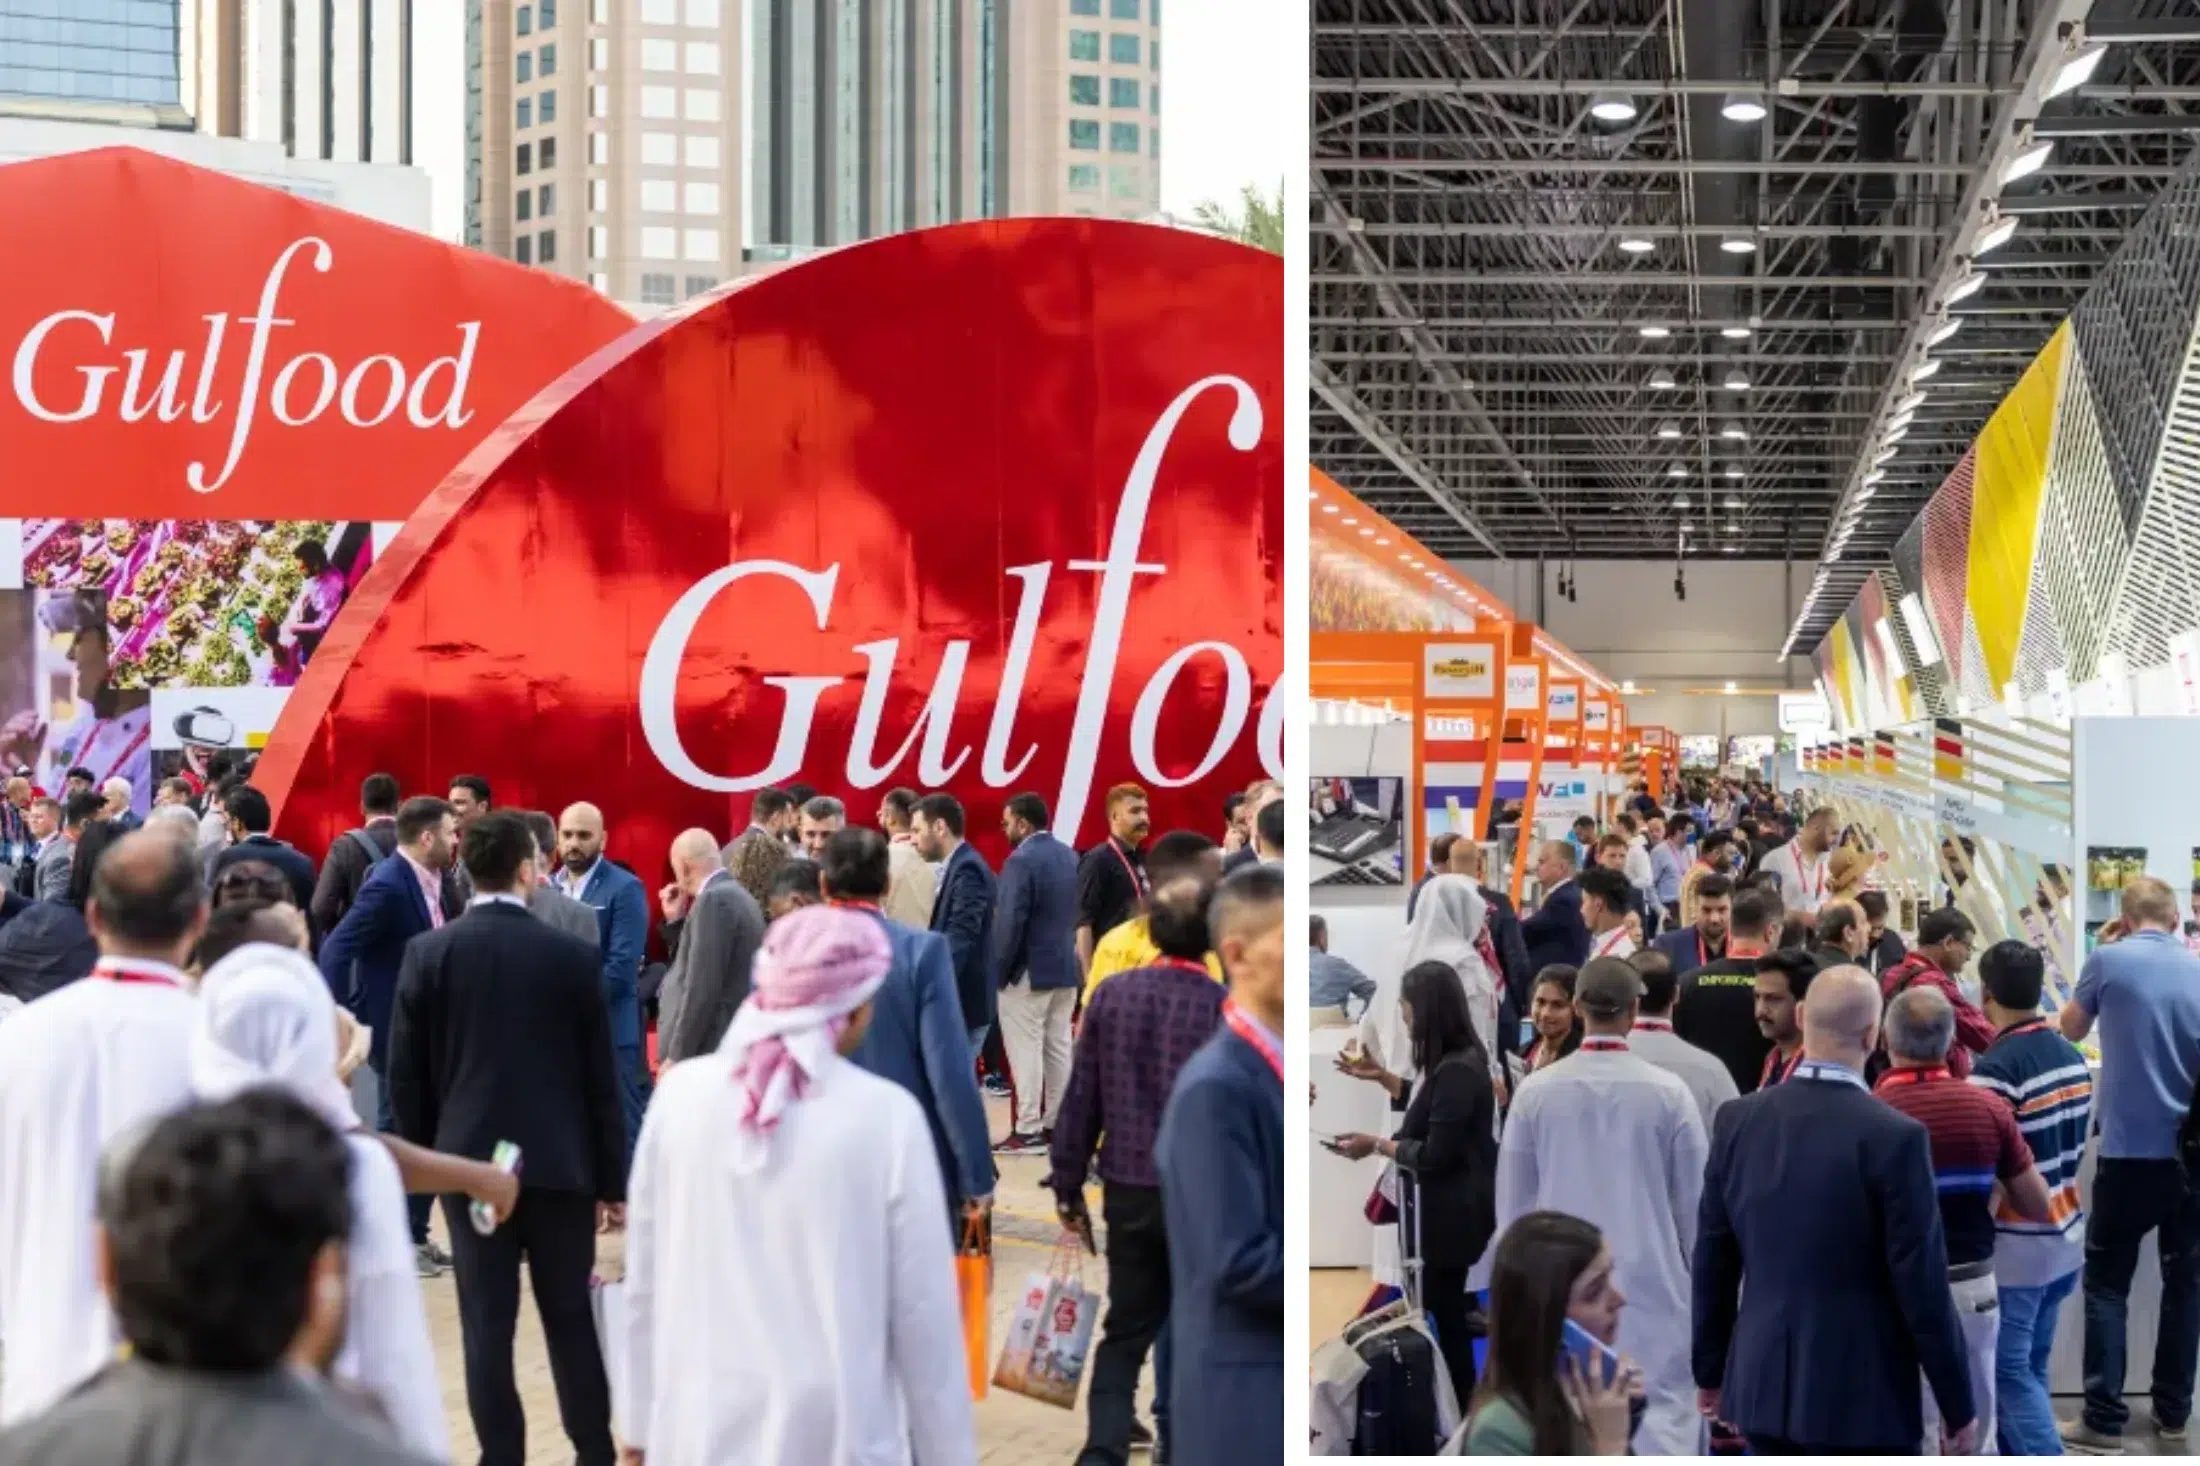 People at Gulfood Expo